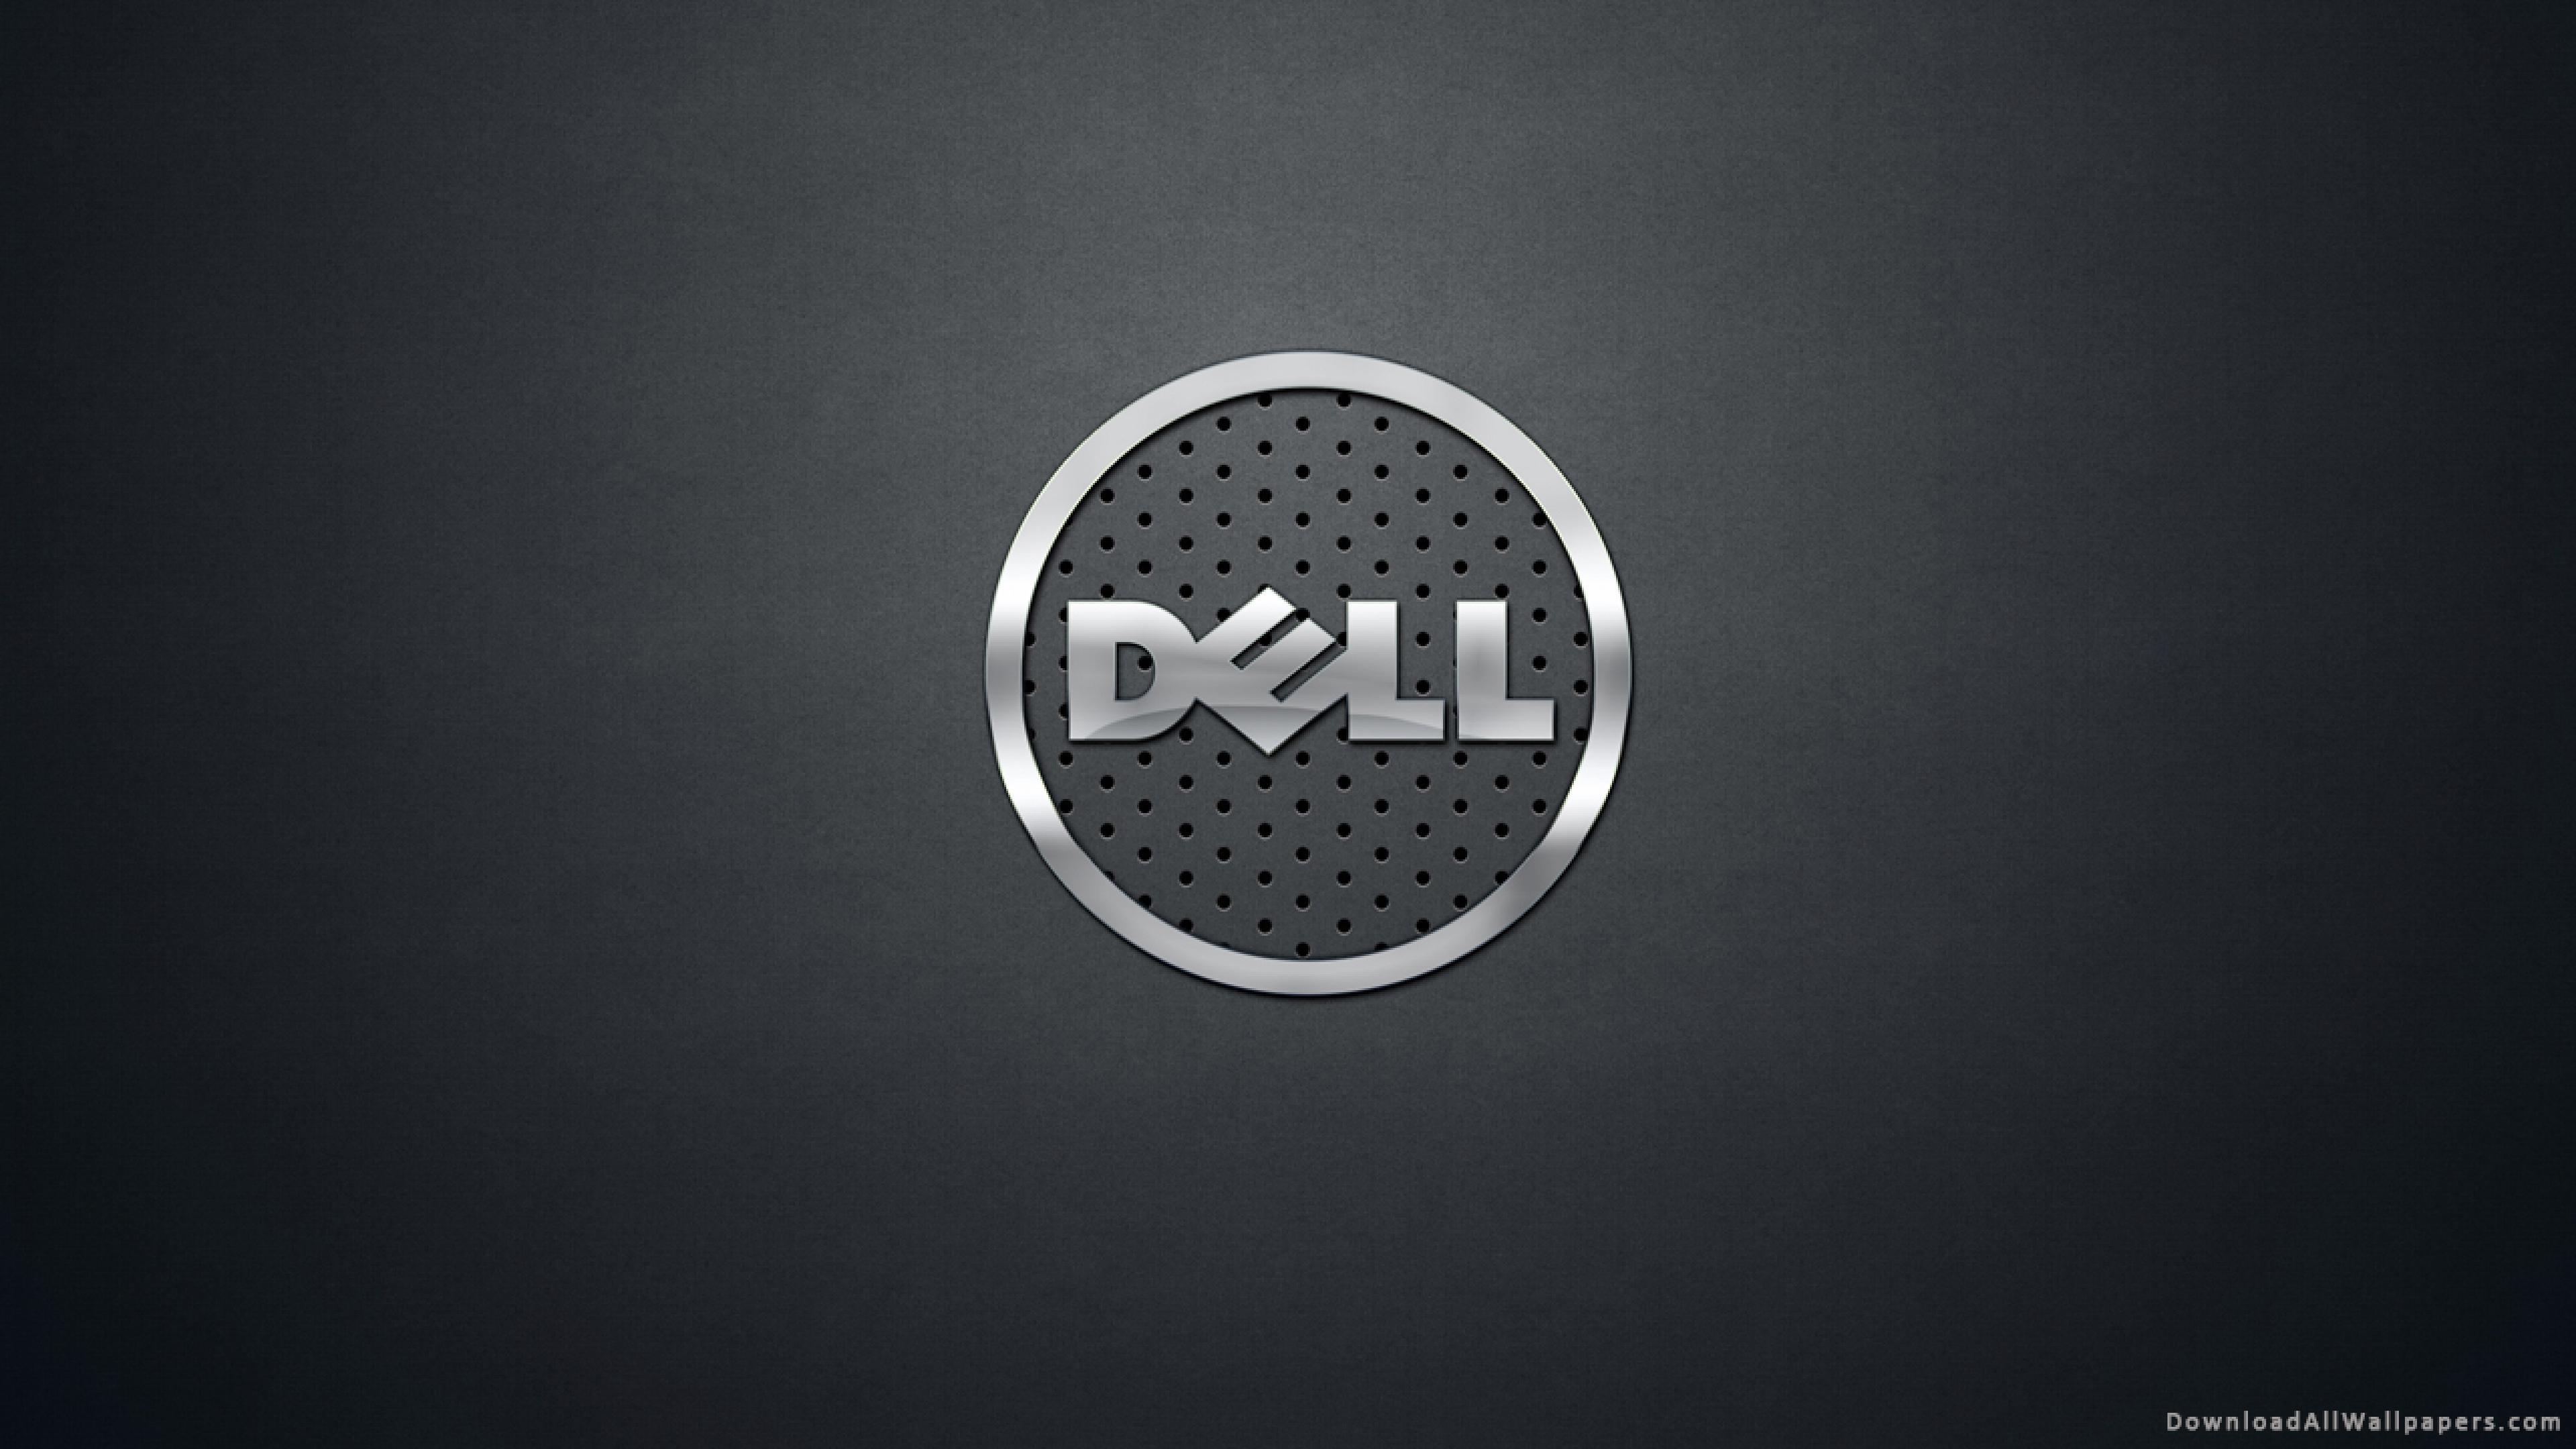 136 Background Laptop Dell Images & Pictures - MyWeb